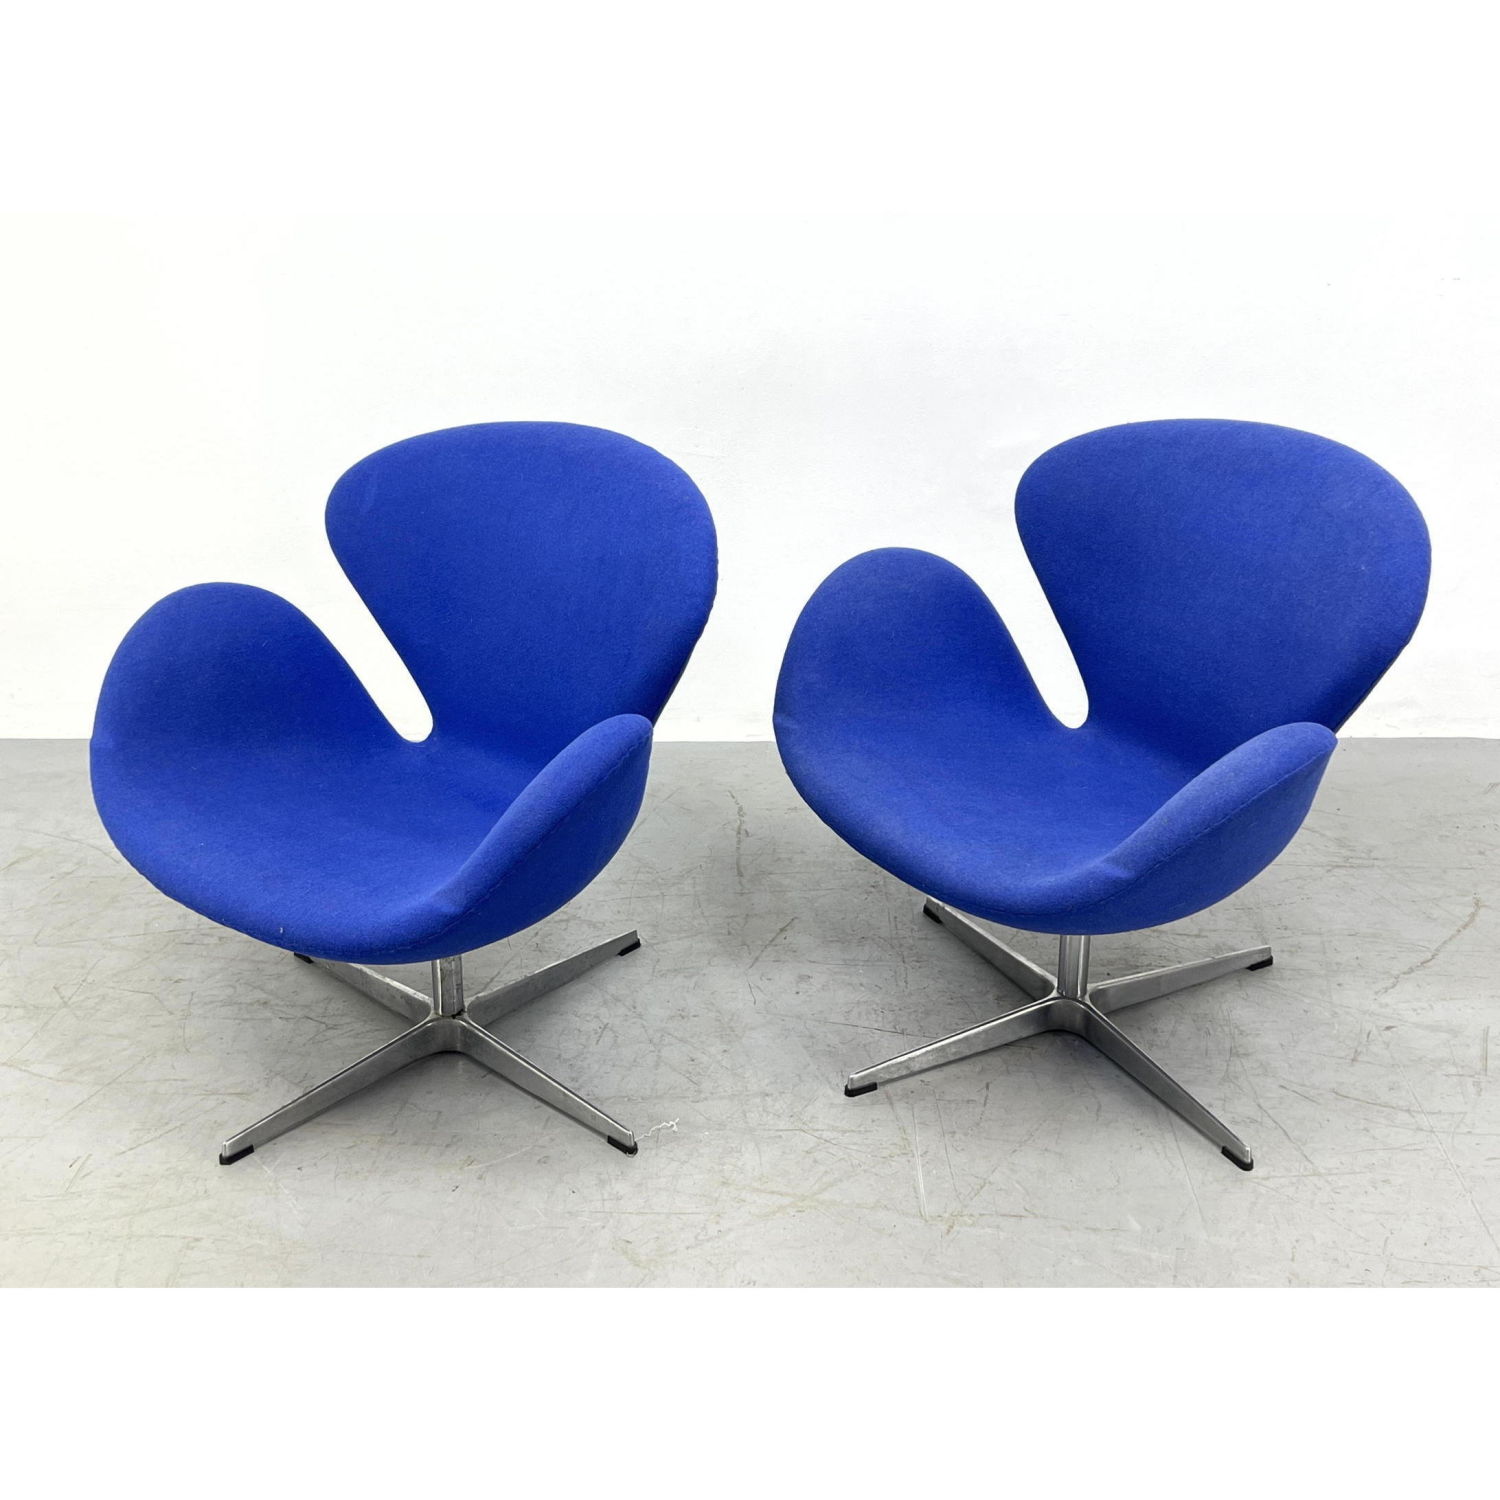 Pair of blue swan chairs. After